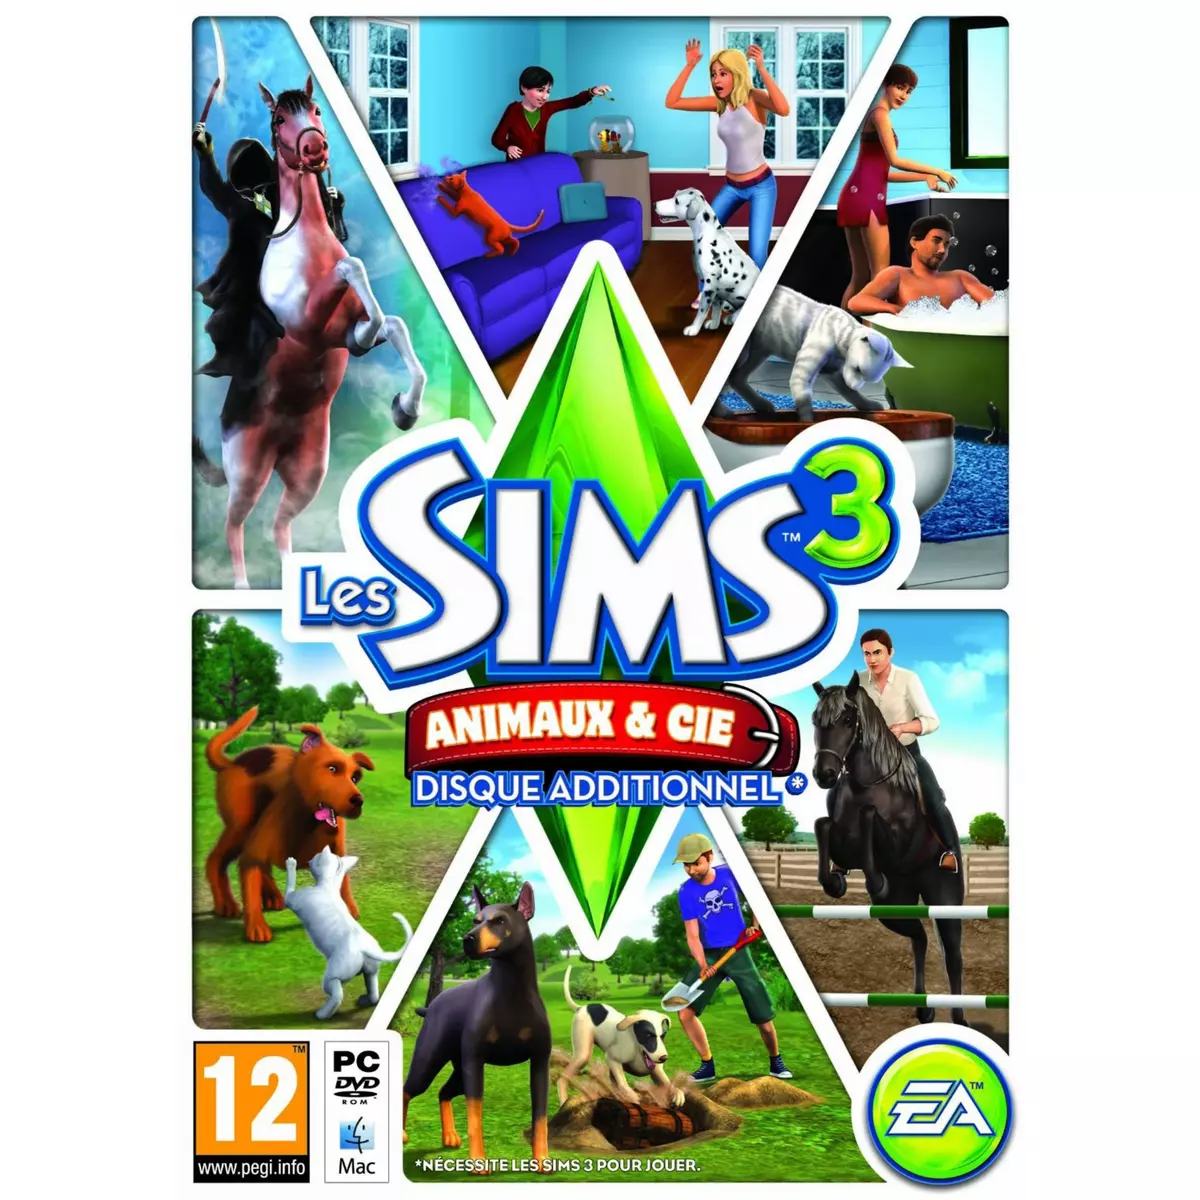 Les sims 3 - Animaux & Cie